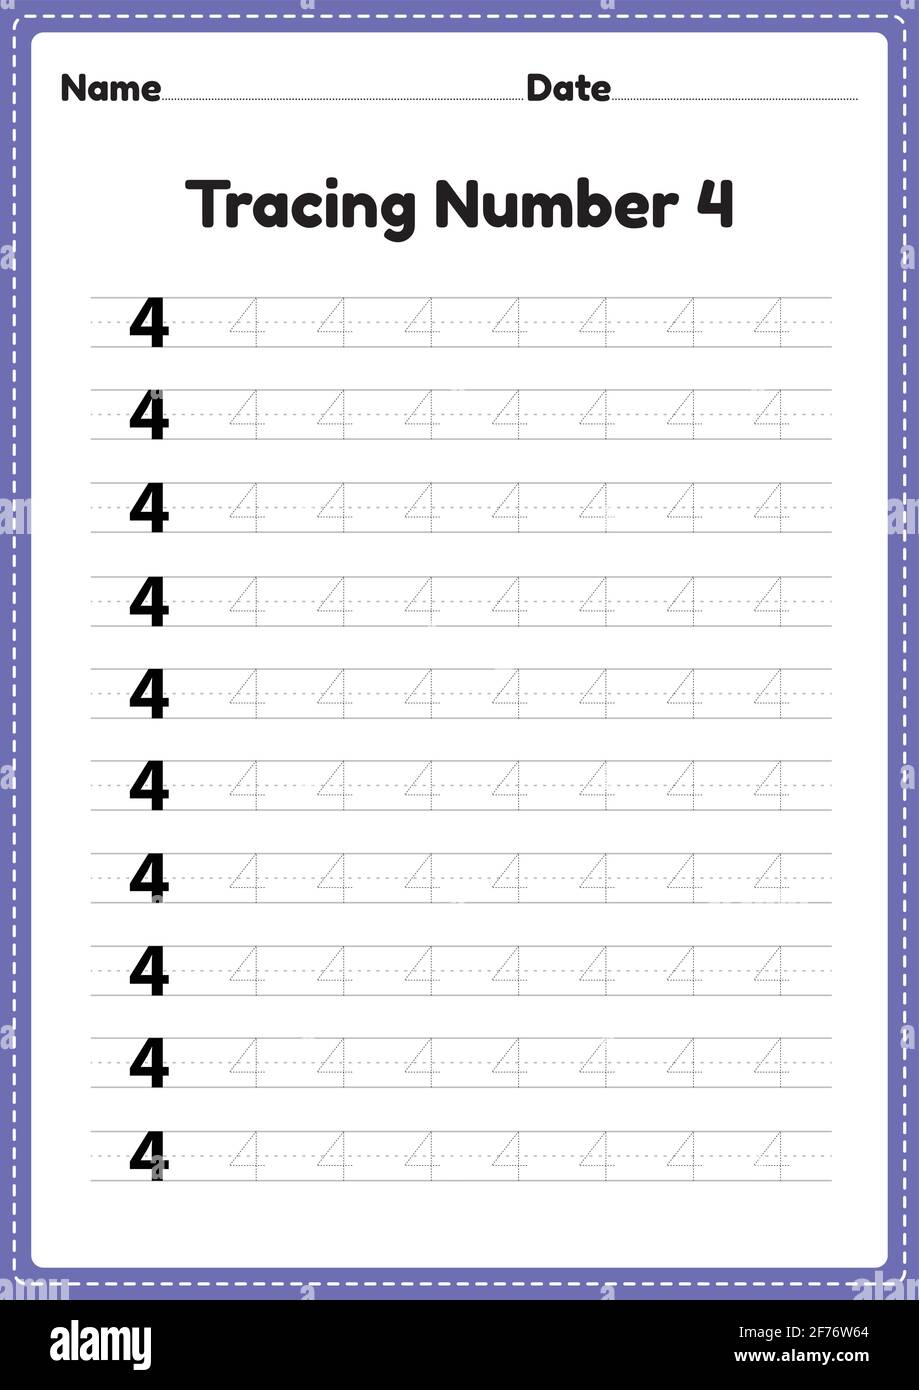 Tracing number 4 worksheet for kindergarten and preschool kids for educational handwriting practice in a printable page. Stock Vector